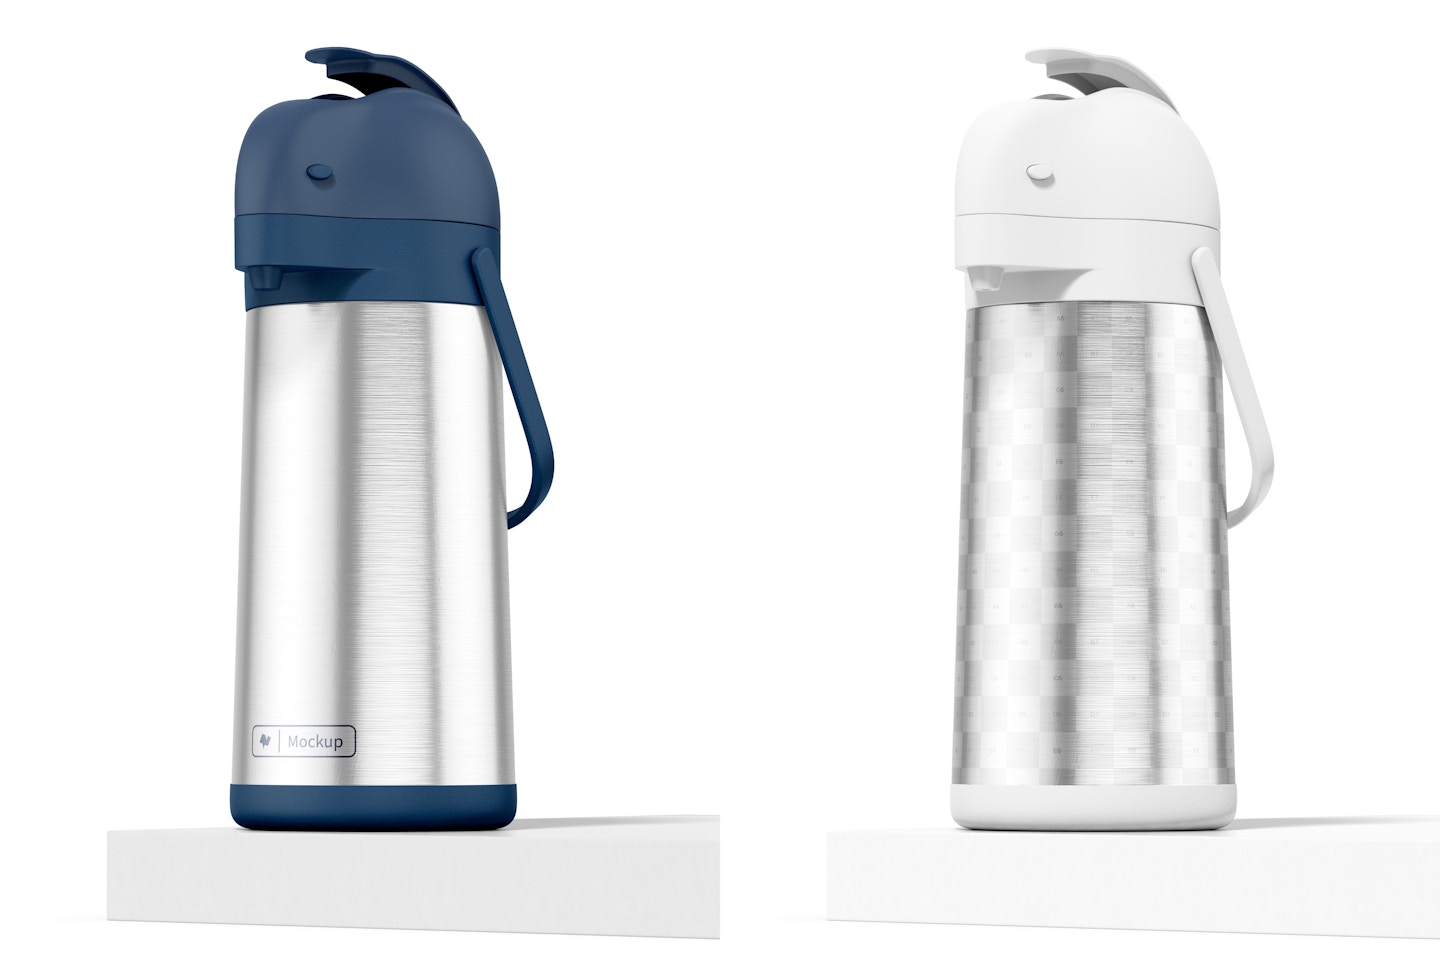 Thermal Coffee Dispenser Mockup, Front View